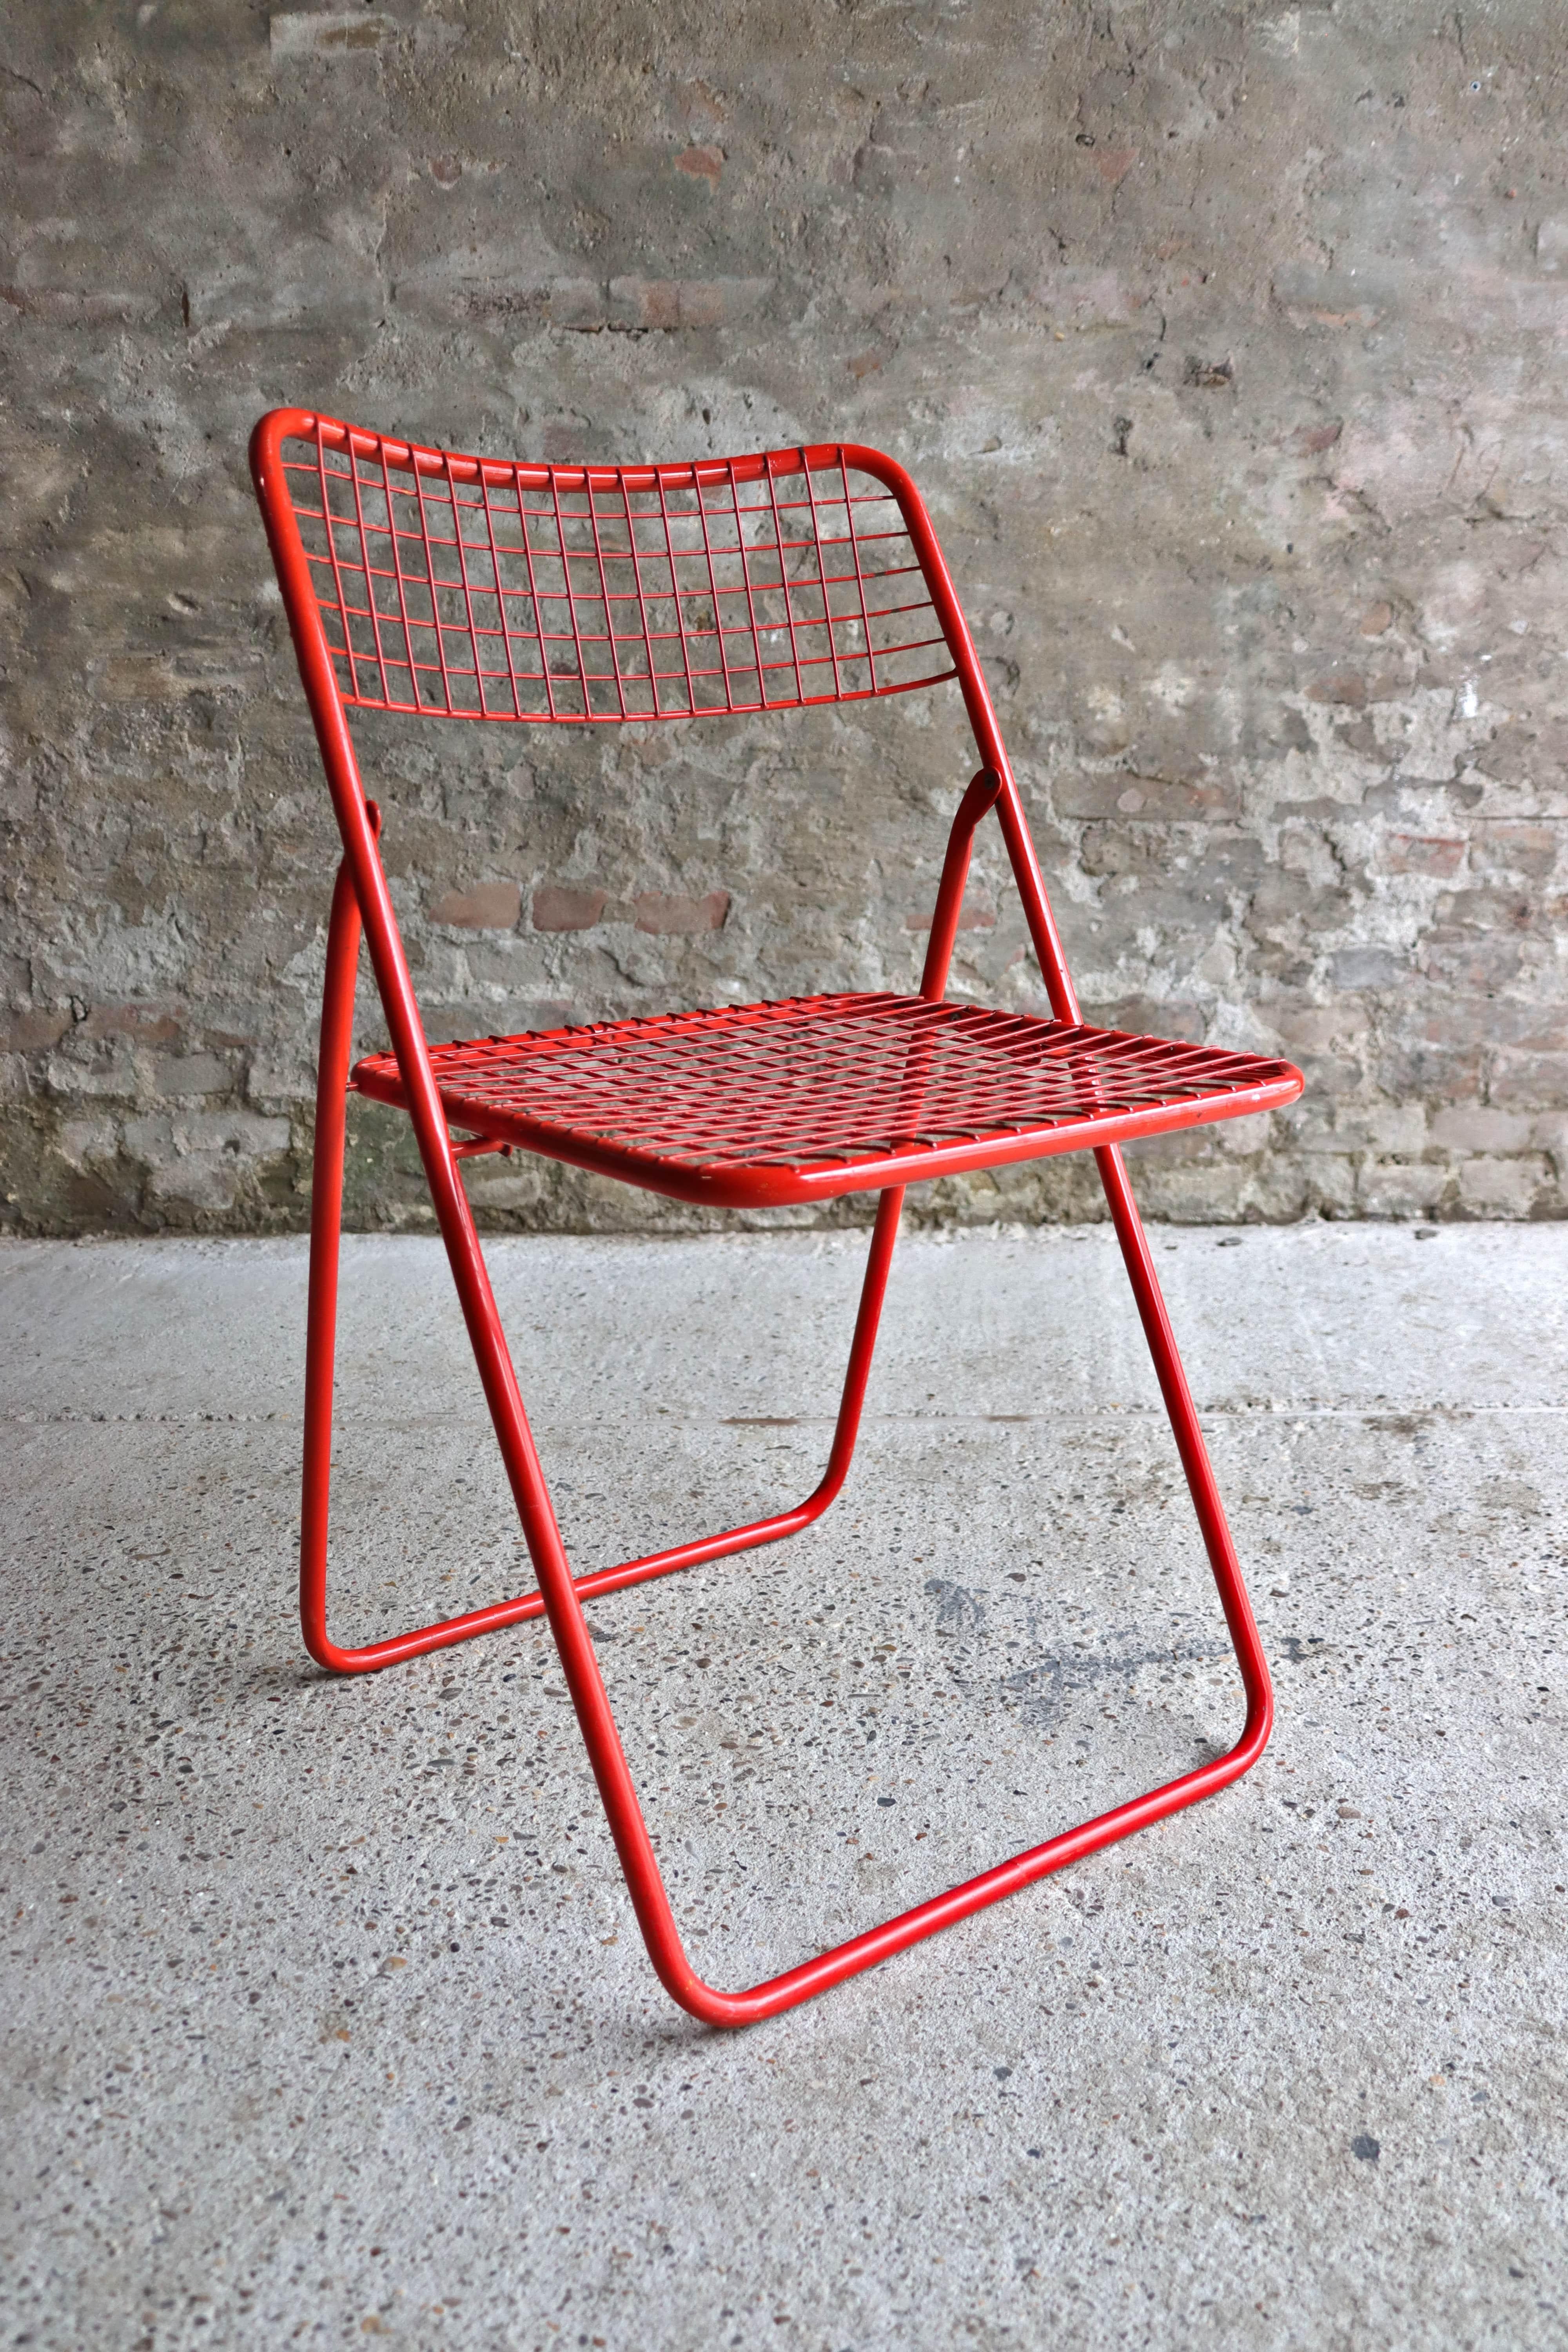 This really cool chair is called Rappen / Ted Net and is designed by Niels Gammelgaard for IKEA in the 1970s. With a red lacquered metal seat and backrest and is in vintage condition. It has signs of rust and marks of usage but it still is a